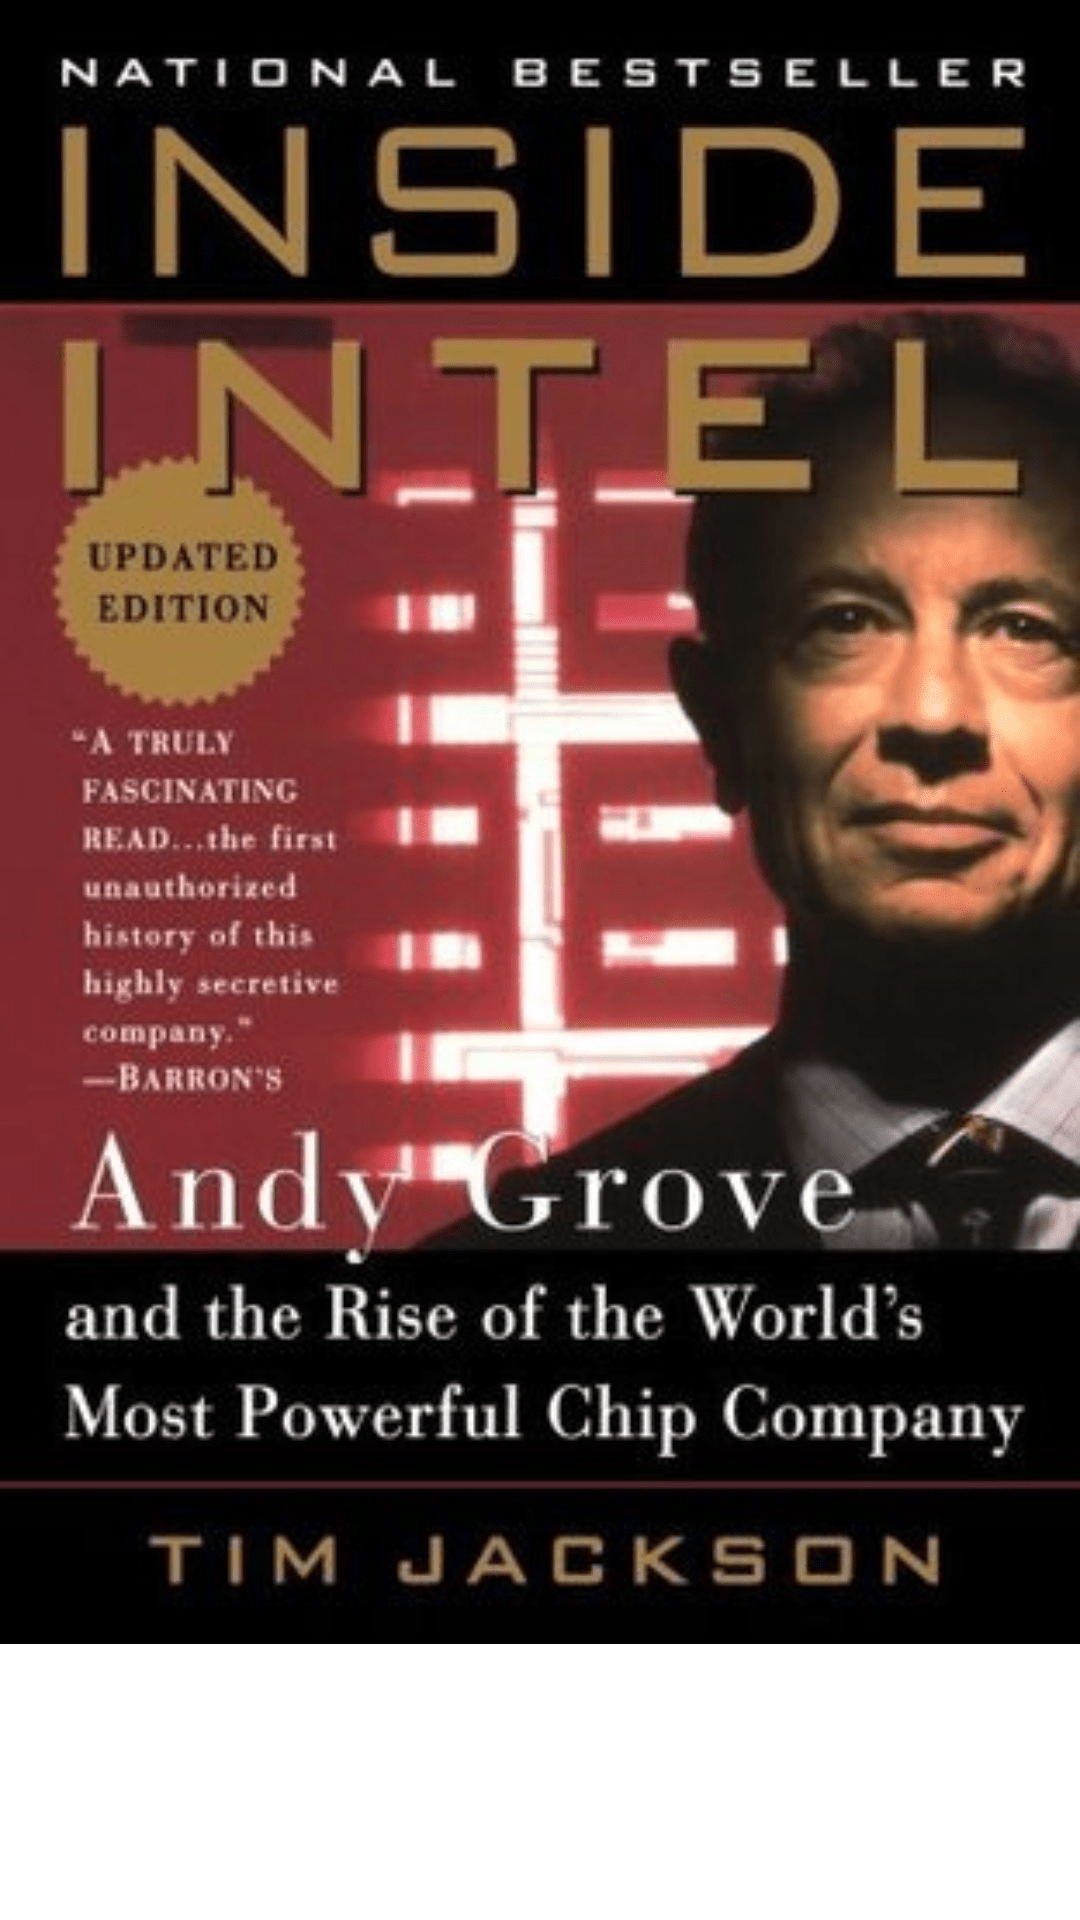 Inside Intel: Andy Grove and the Rise of the World's Most Powerful Chip Company